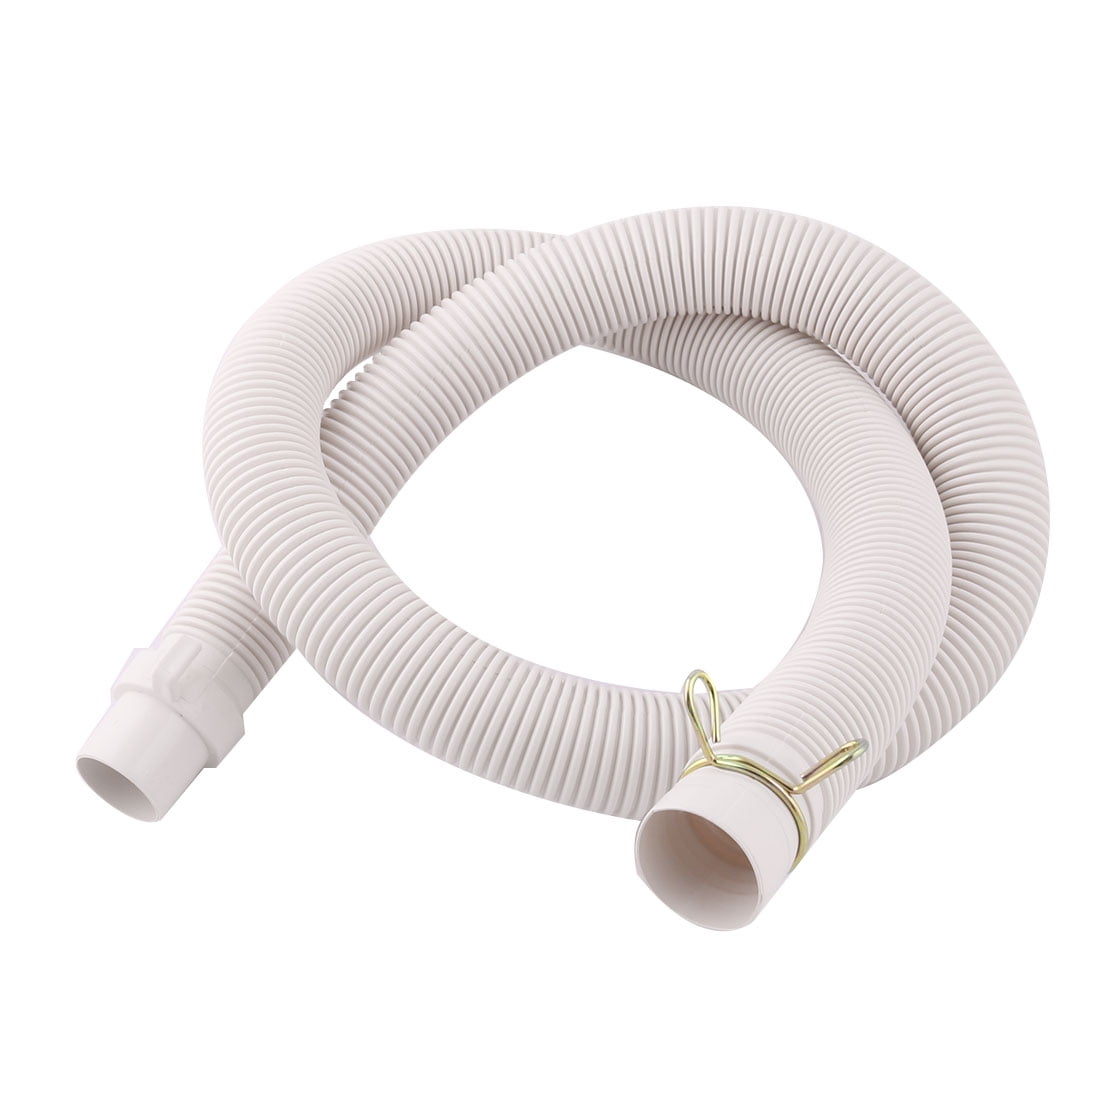 3 9Ft Length Washing Machine Drain Discharge Hose Extension Kit Pipe